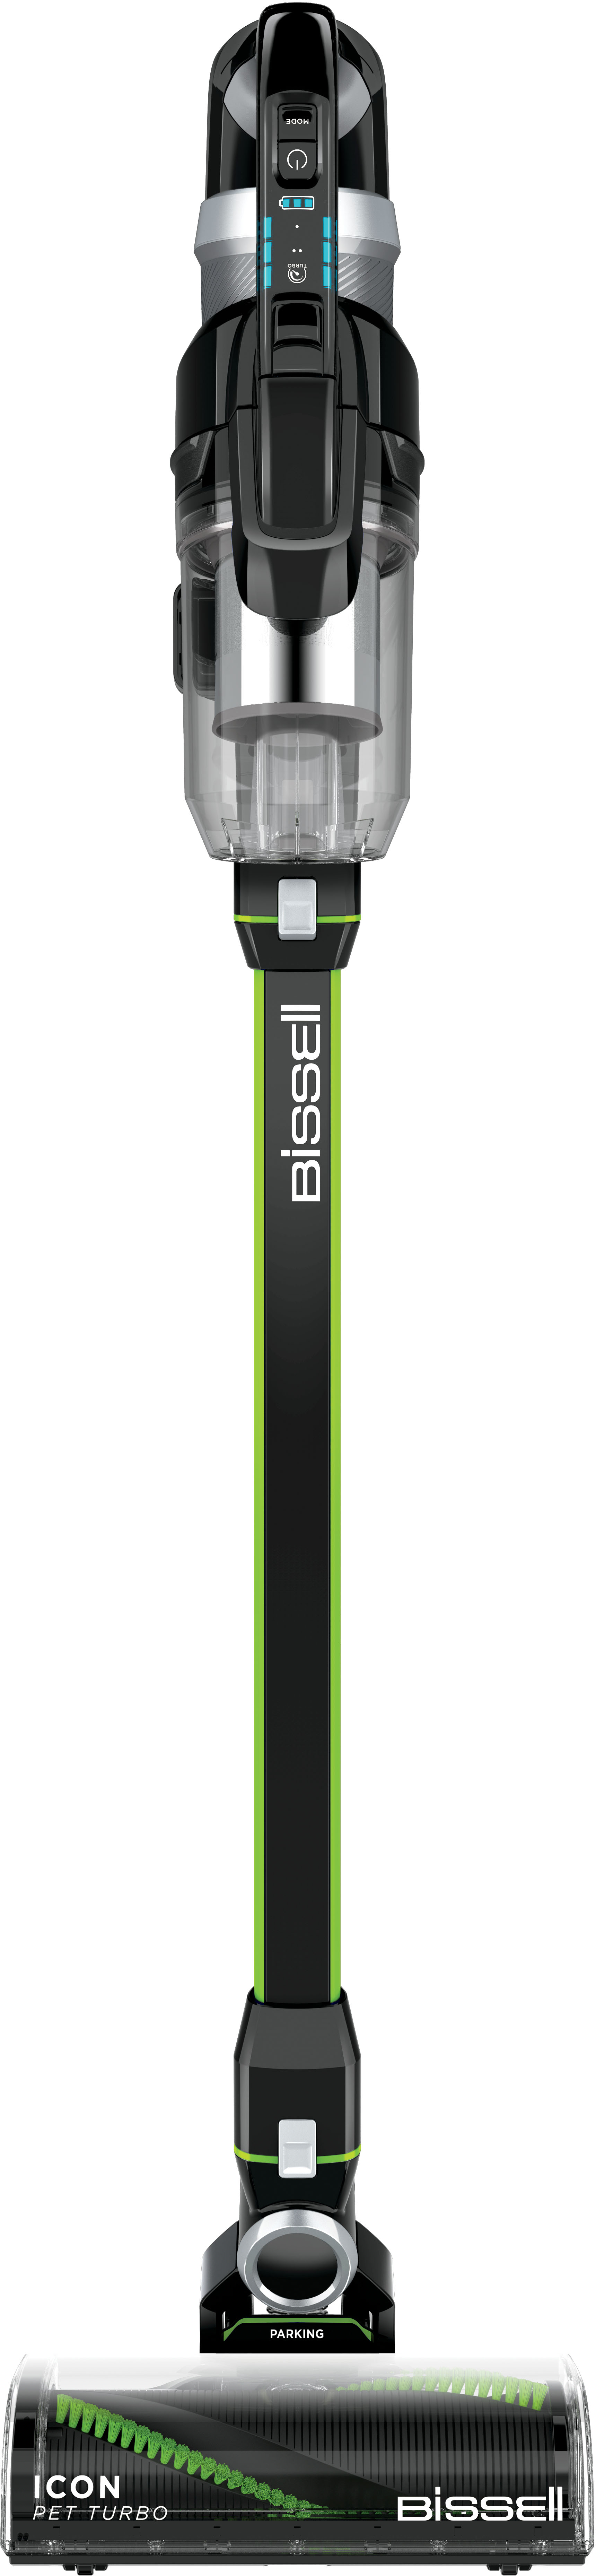 BISSELL ICONPET TURBO EDGE Cordless Stick Vacuum Black, Cha Cha Lime 3177A  - Best Buy